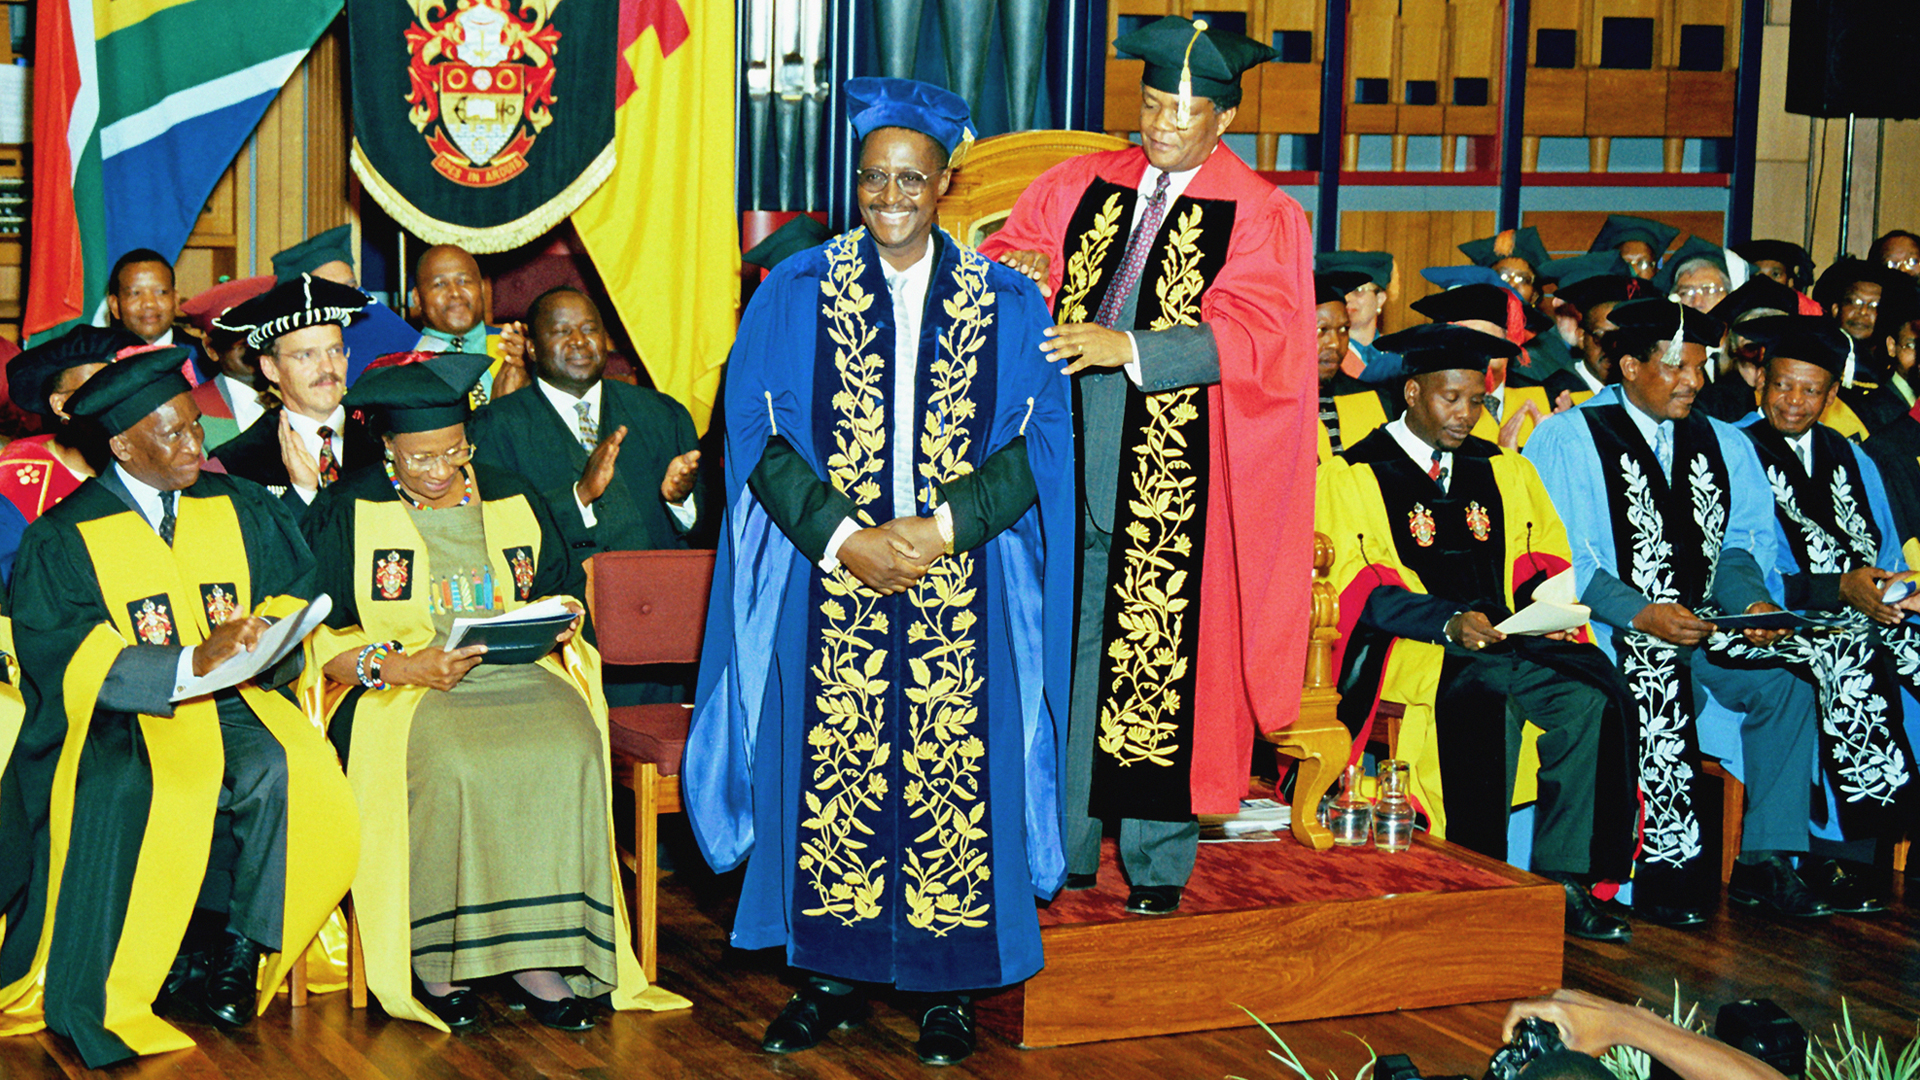 <p>Theologian, attorney and former anti-apartheid activist Professor Nyameko Barney Pityana becomes Unisa’s first black Principal and Vice-Chancellor. He will guide Unisa towards racially equitable transformation and Africanisation.</p>